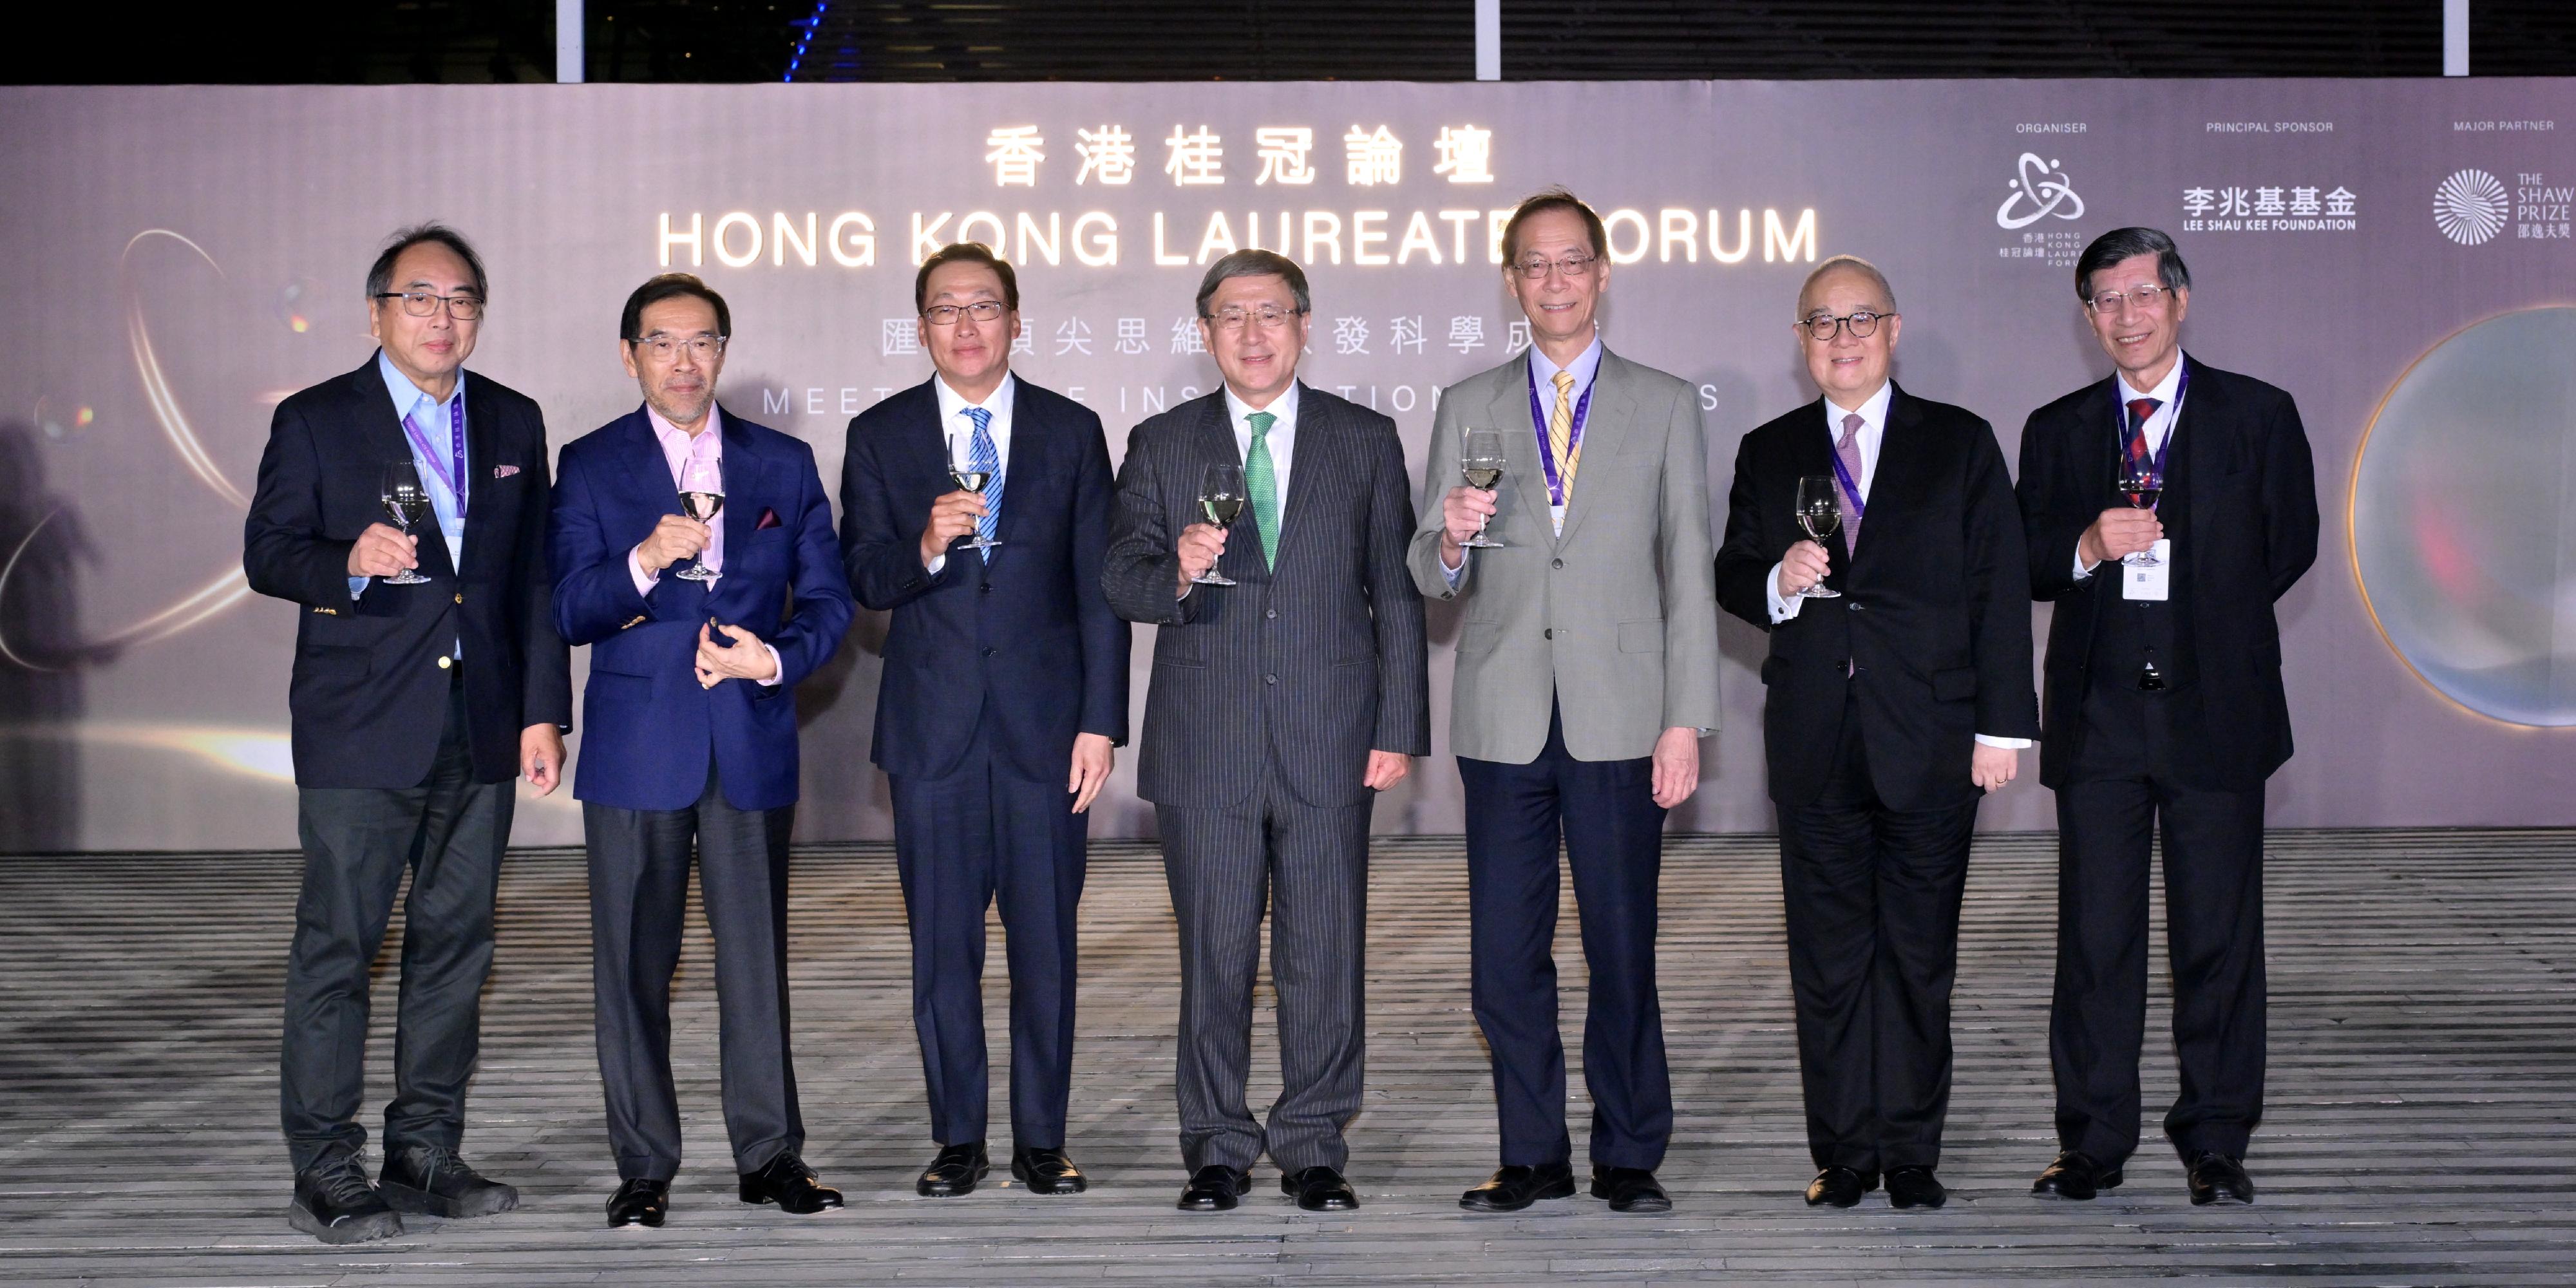 The Deputy Chief Secretary for Administration, Mr Cheuk Wing-hing, attended the Hong Kong Laureate Forum 2023 Gala Dinner cum Closing Ceremony this evening (November 17). Photo shows Mr Cheuk (centre), the Chairman of the Council of the Hong Kong Laureate Forum, Professor Timothy Tong (third right), and other guests proposing a toast.